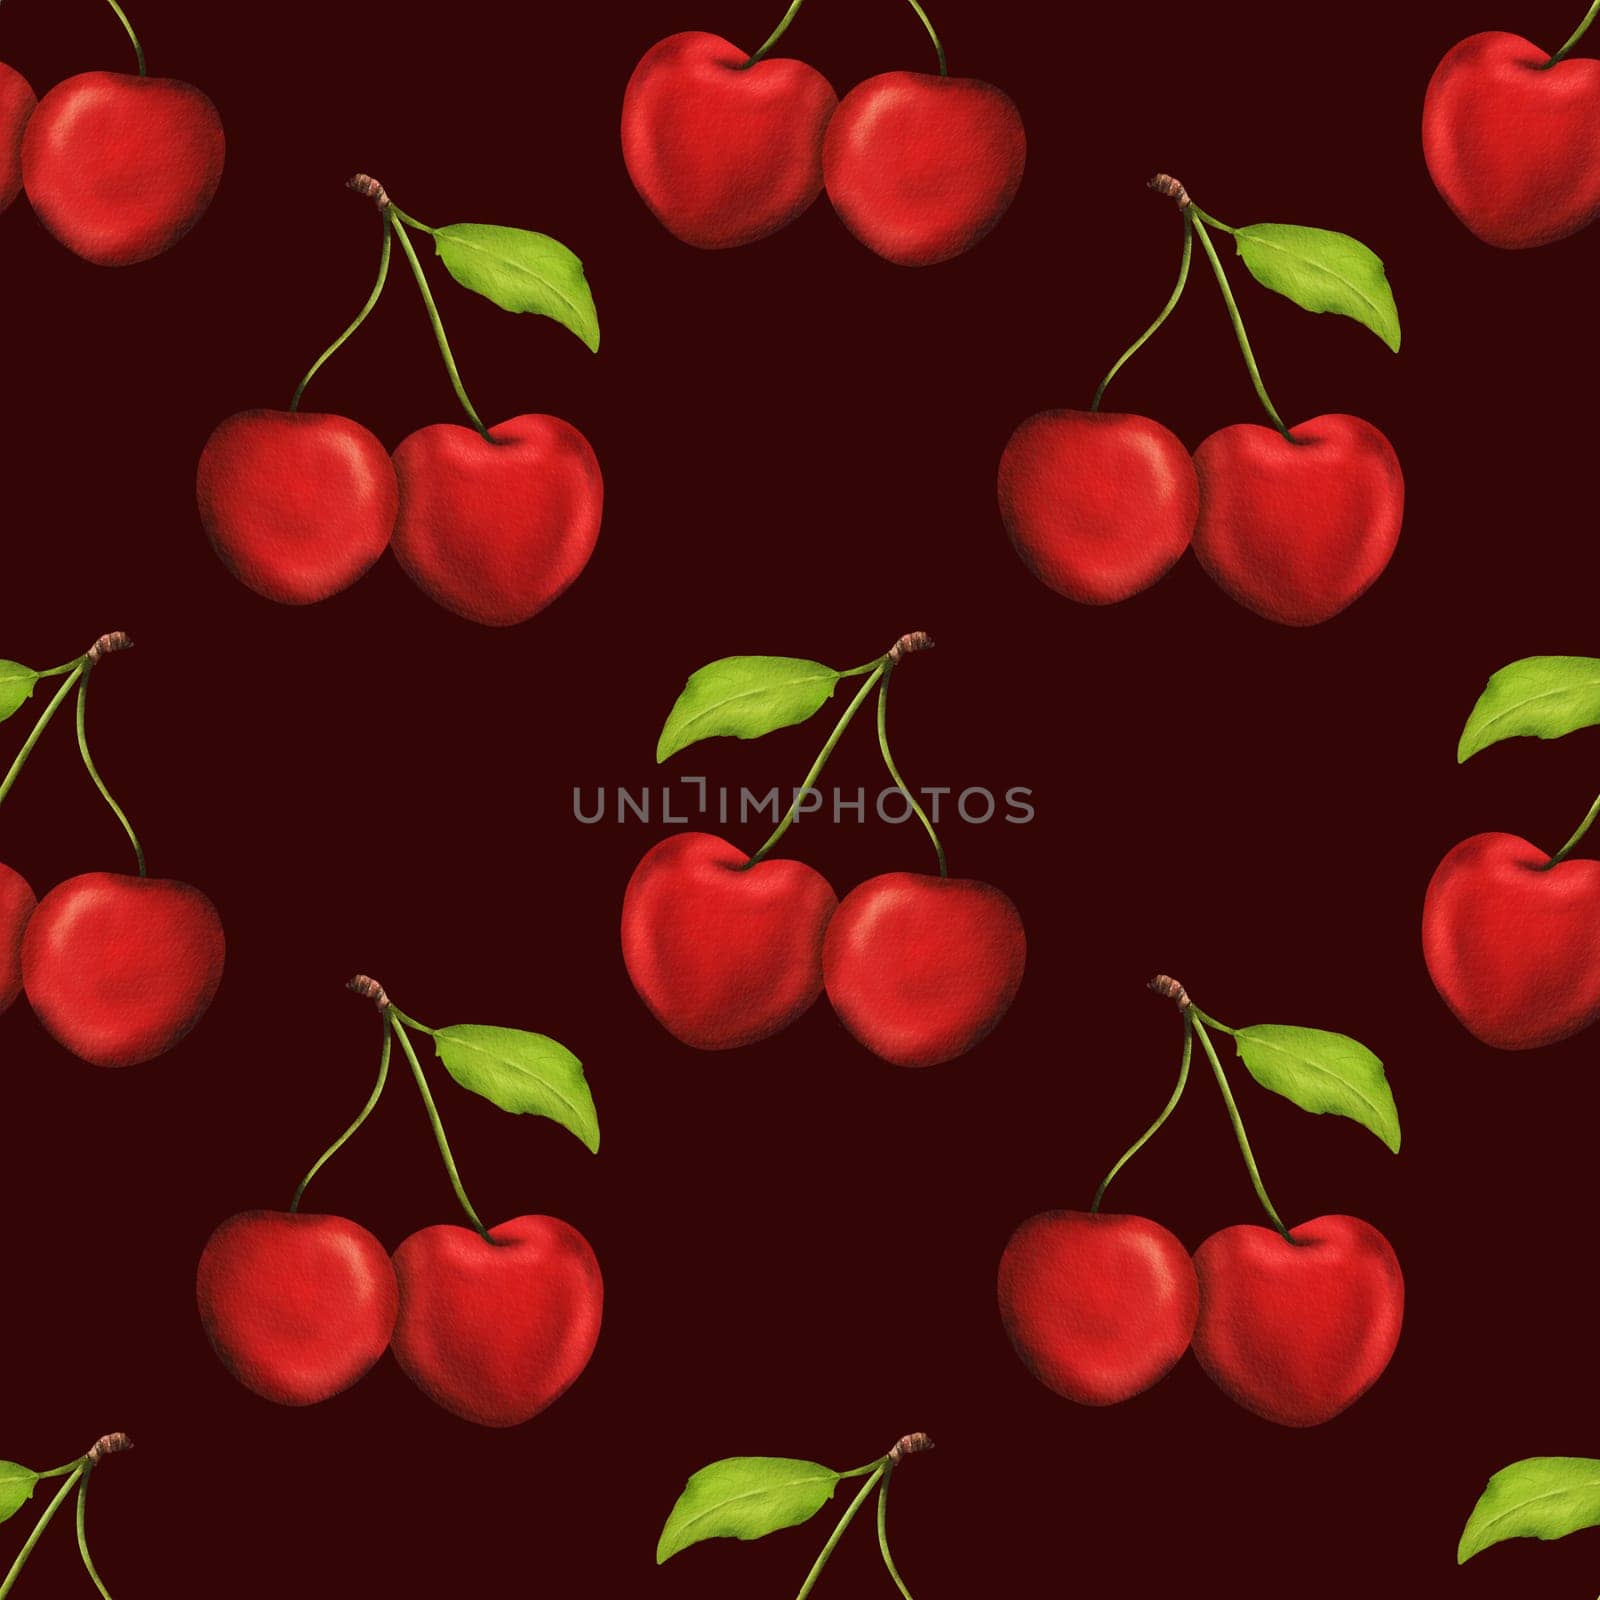 seamless pattern of luscious bright cherries. for kitchen-themed decor, recipes, textiles, aprons, packaging, cherry products like jam and sweets, as well as gum wrappers. watercolor illustration.